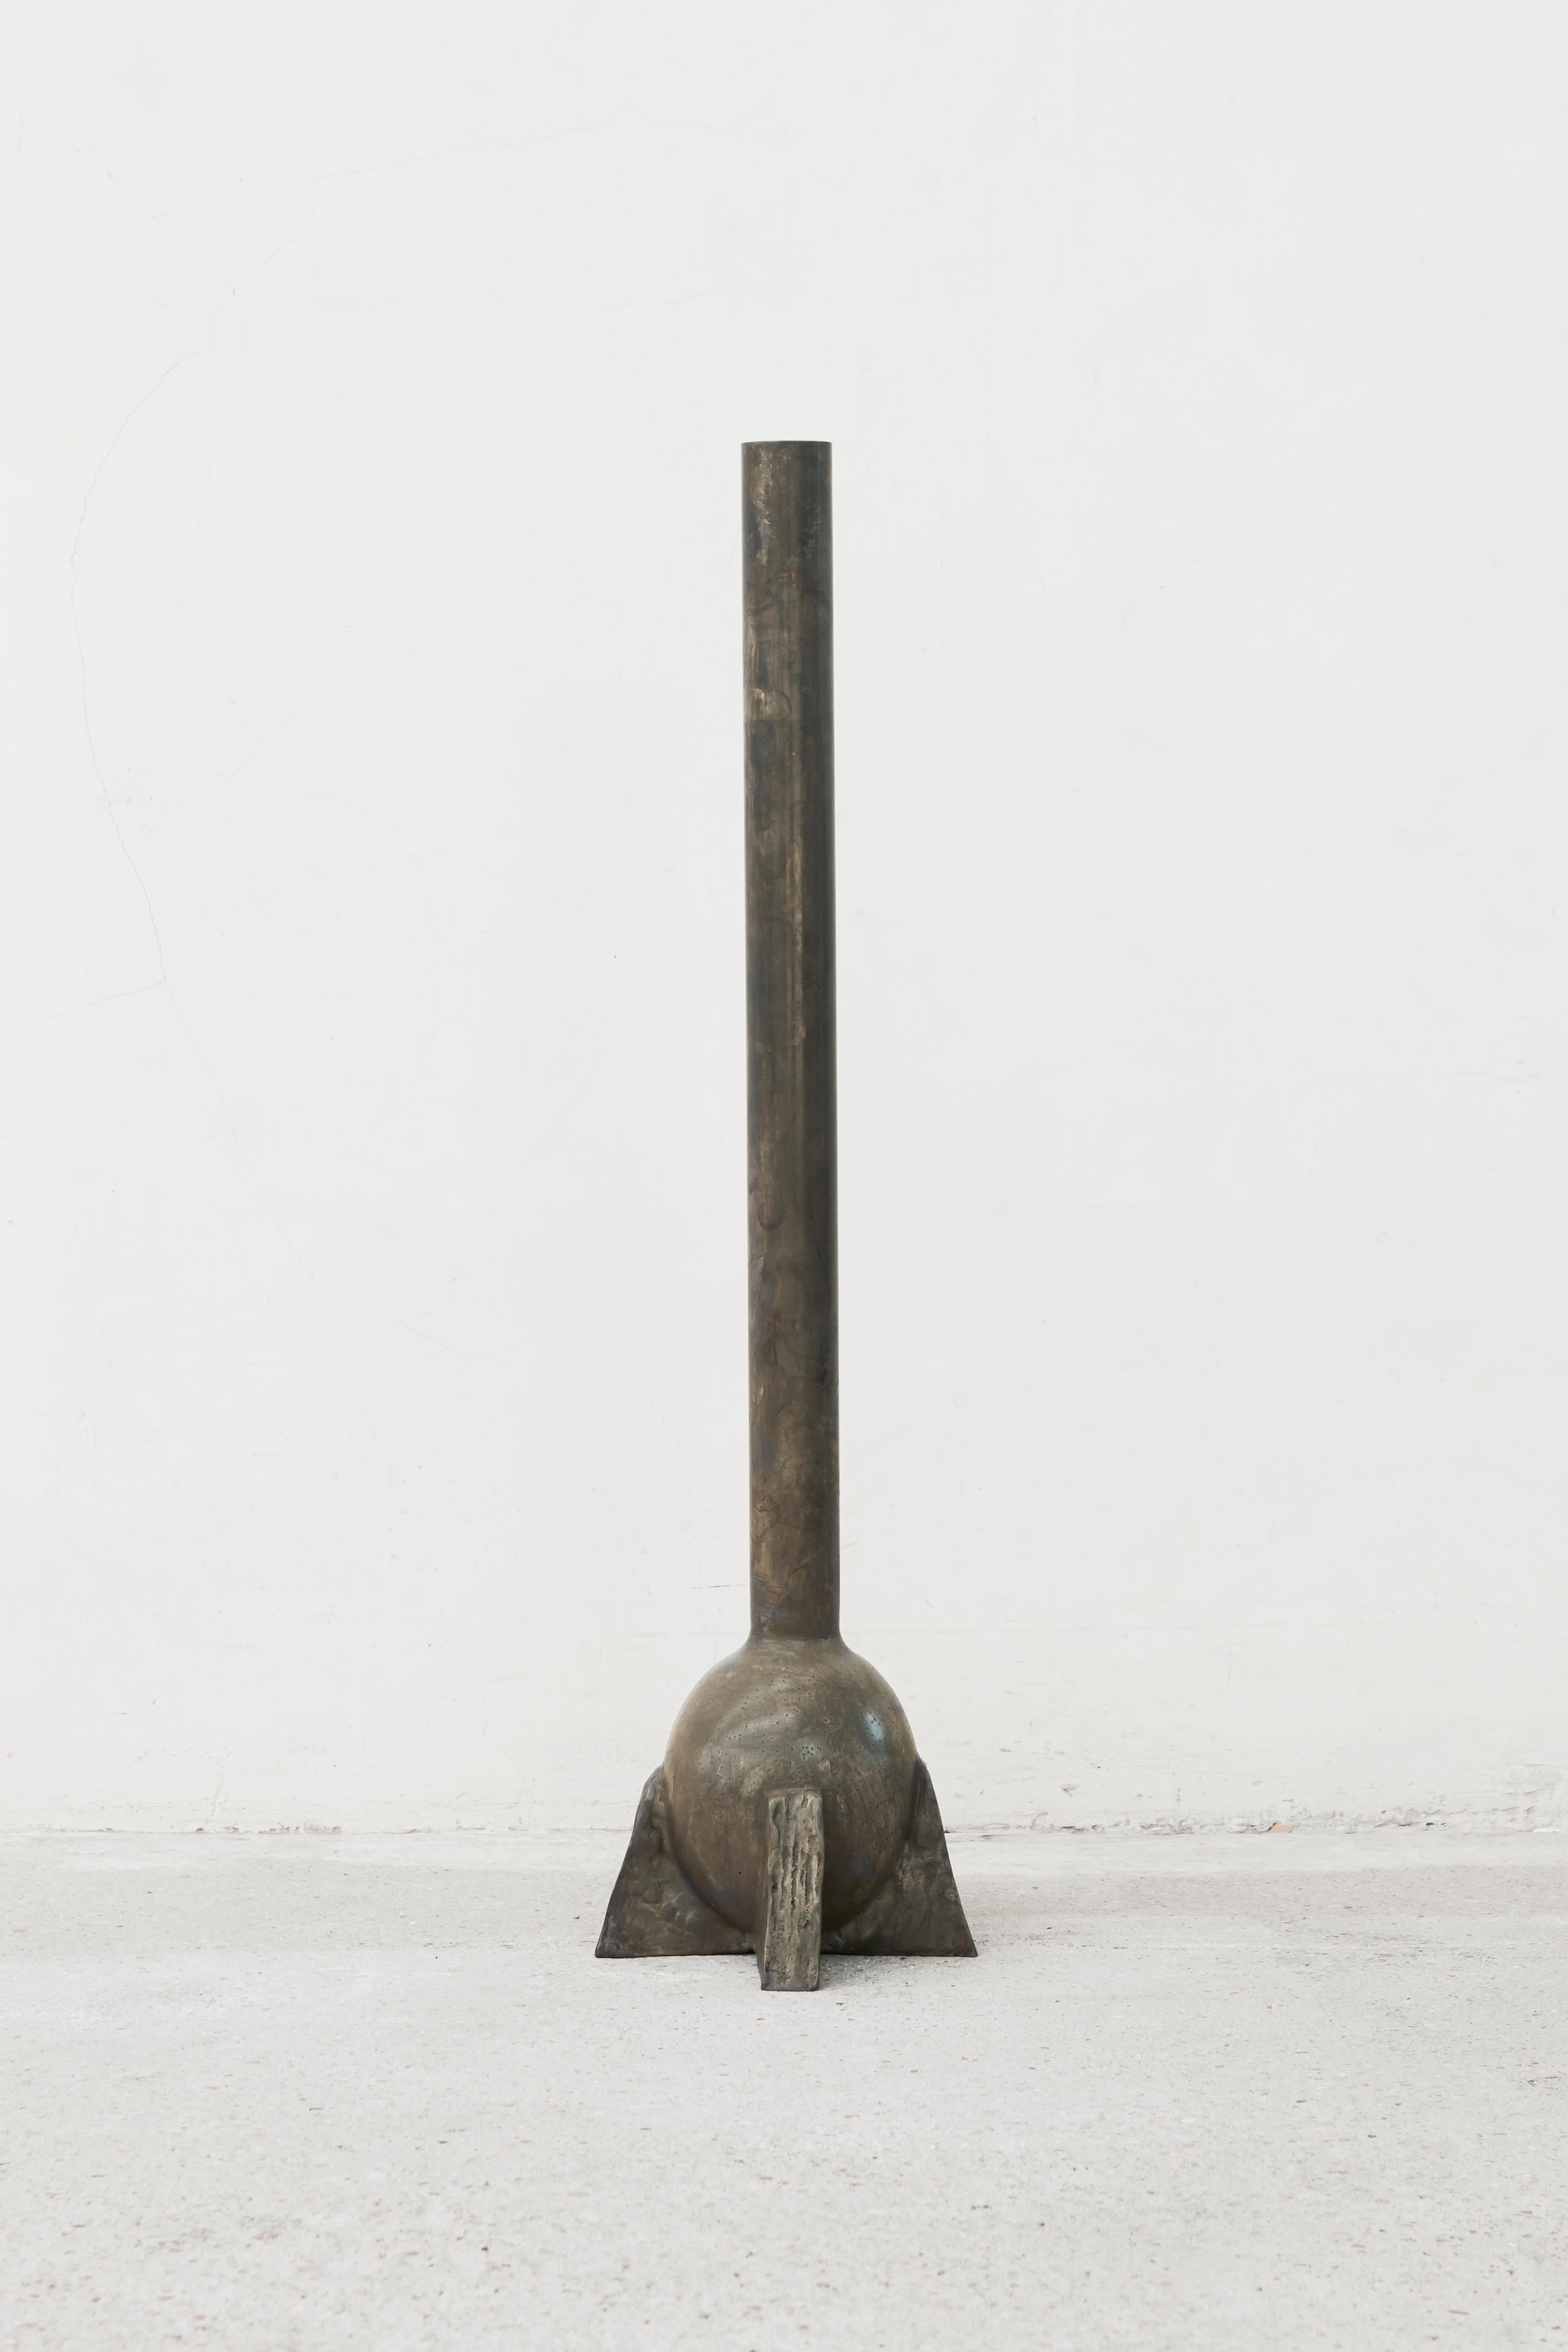 Swan neck by Rick Owens
2007
Dimensions: L 20 x W 20 x H 71 cm
Materials: Bronze
Weight: 4.5 kg

Available in Black finish or Nitrate (Dark Brown) finish, please contact us.

Rick Owens is a California-born fashion and furniture has developed a